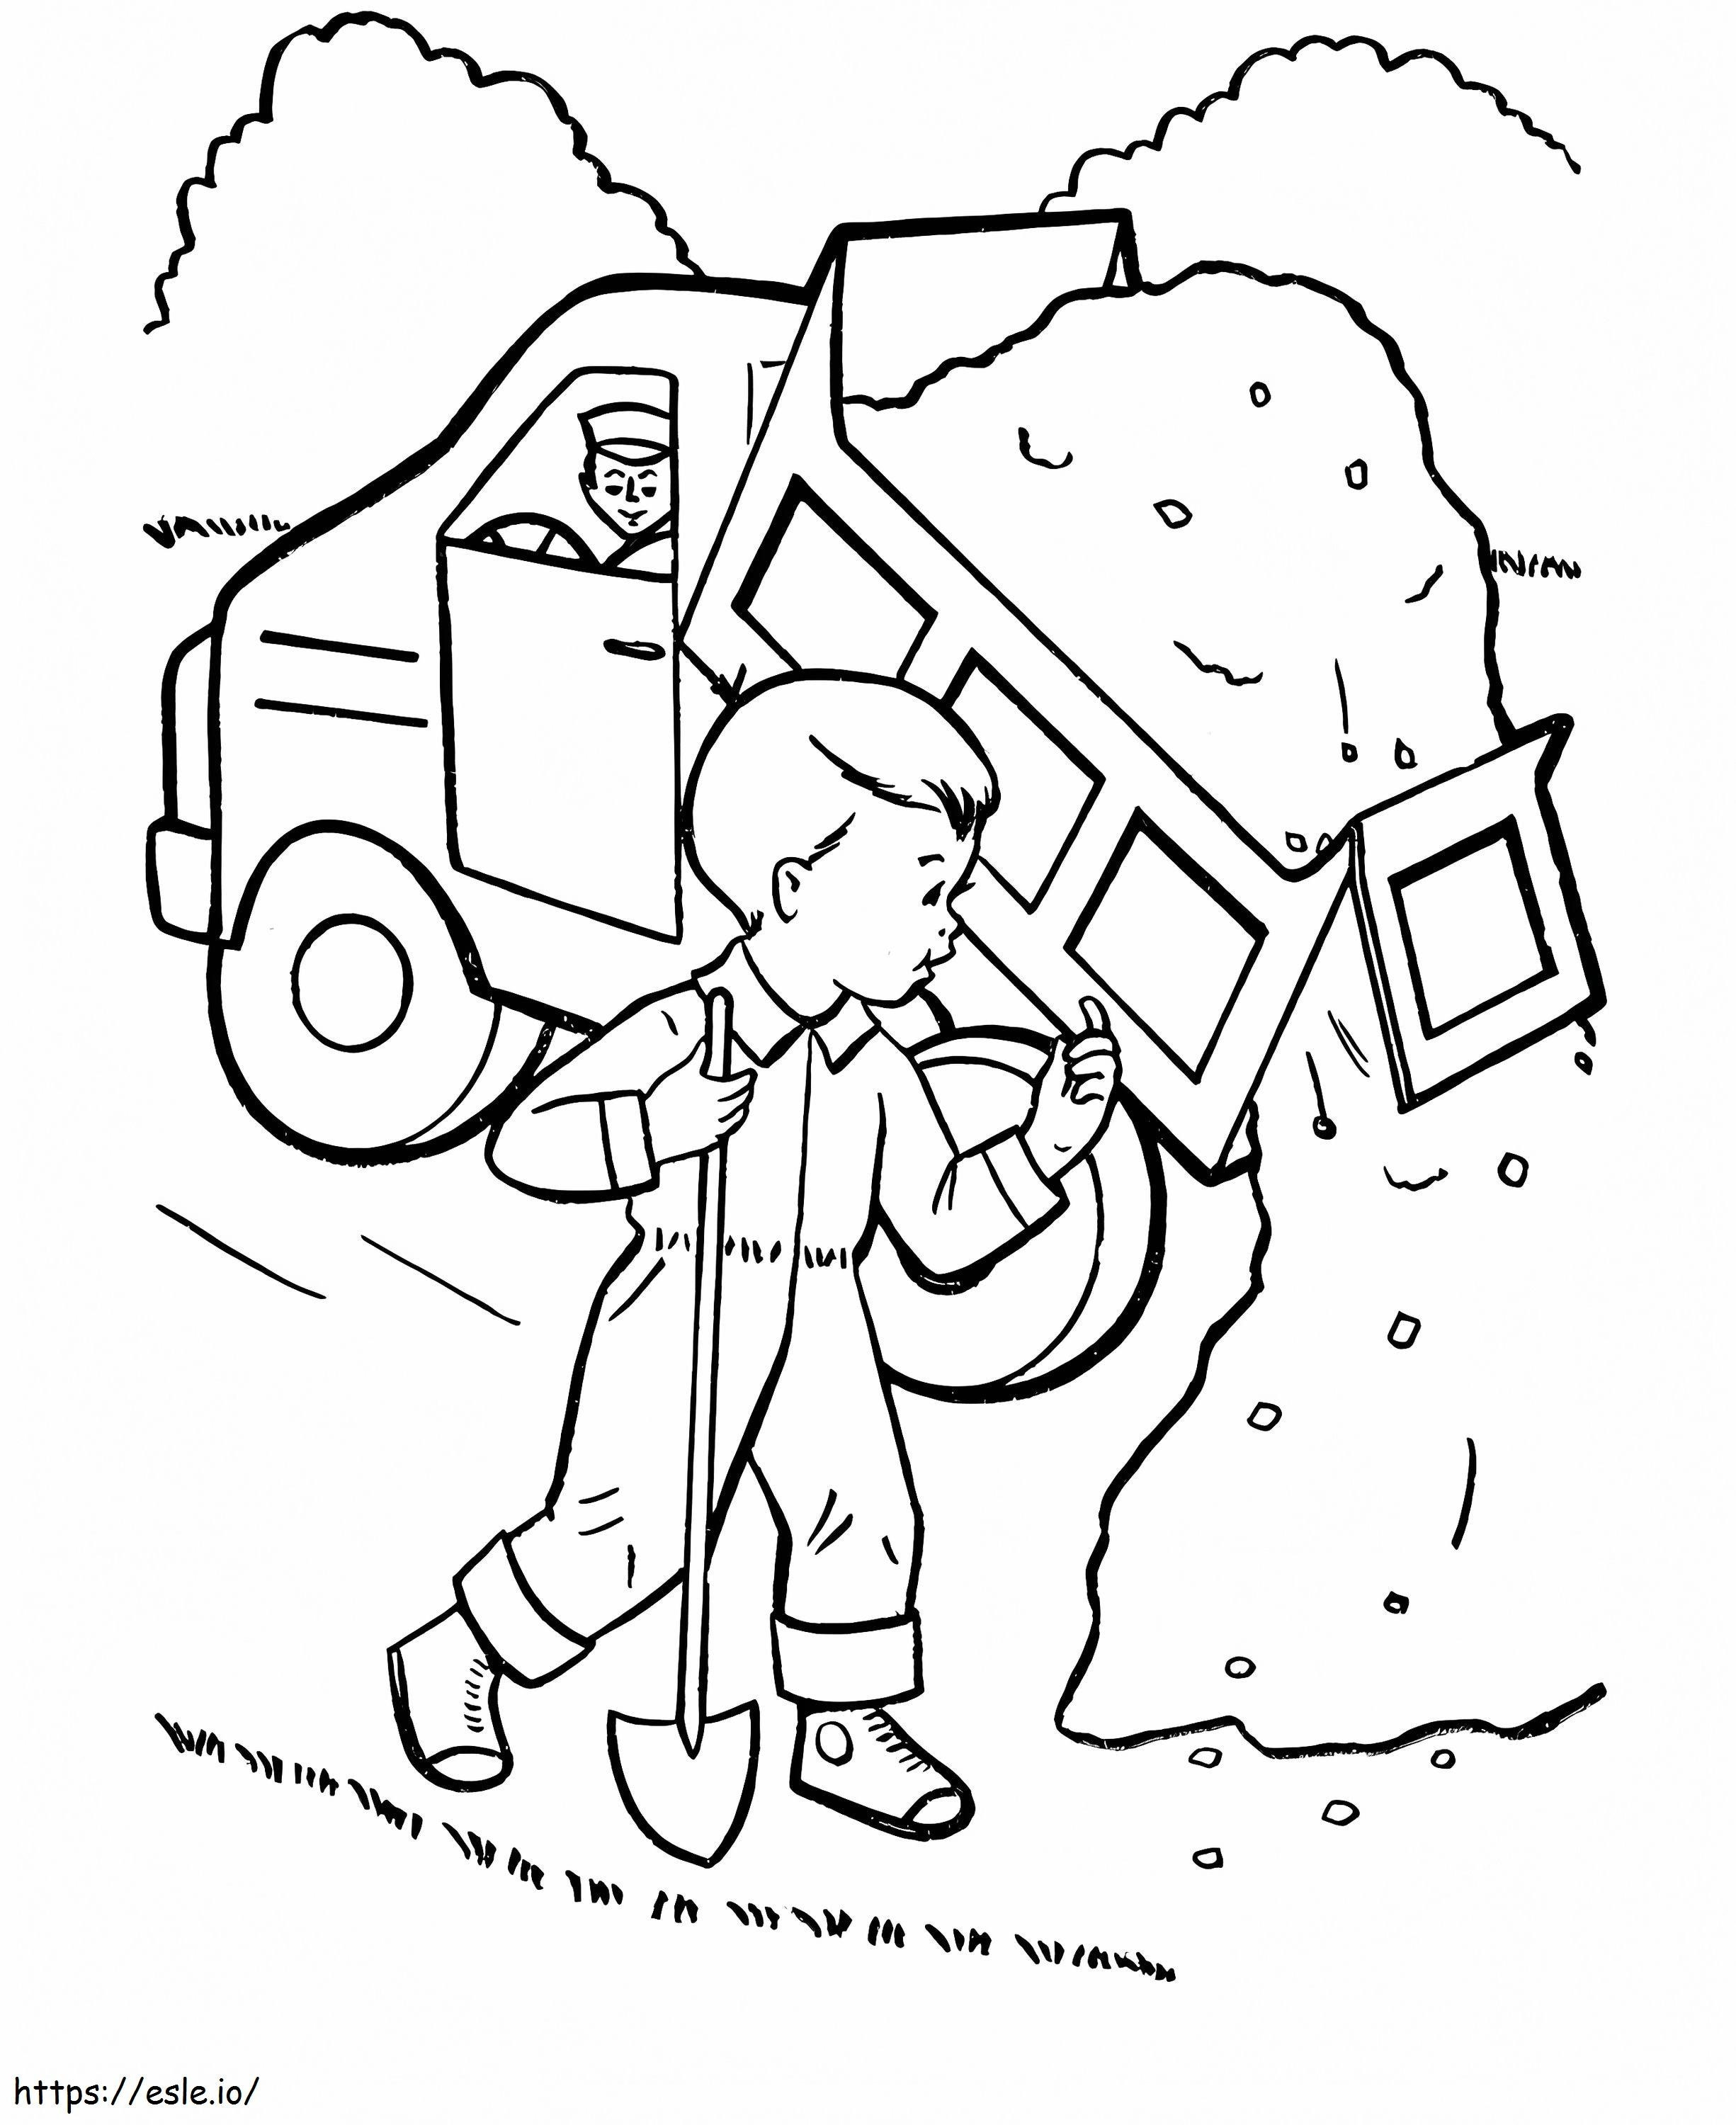 Kid And Dump Truck coloring page